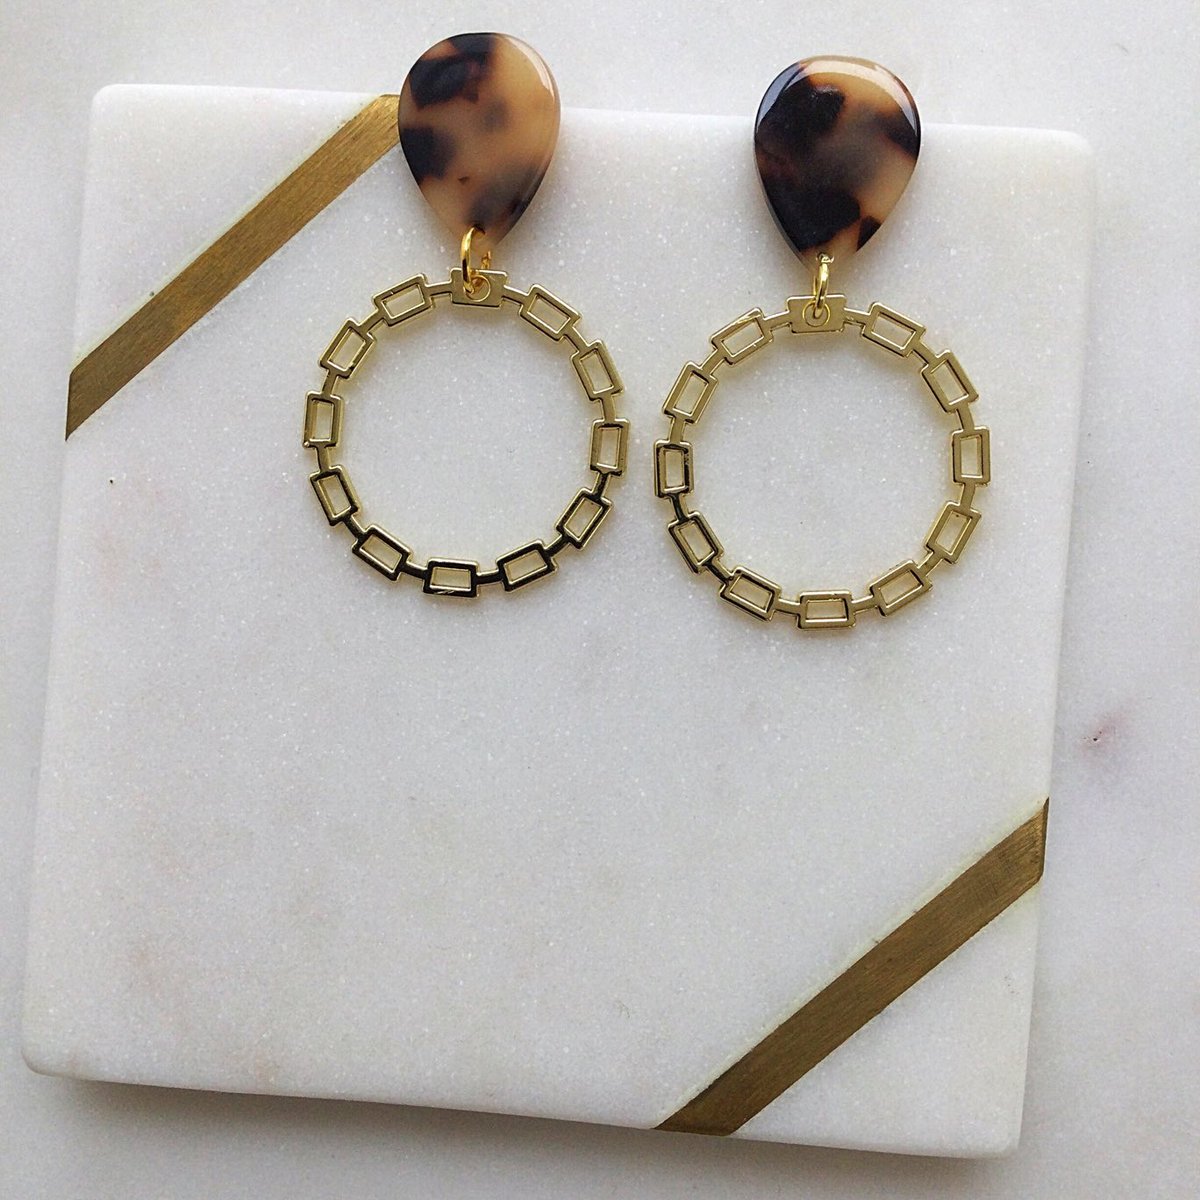 Excited to share this item from my #etsy shop: Tortoise Stud Gold Circle Hoop Fashion Dangle Statement Earrings - Handmade - Gold Earrings - Geometric Earrings - Other Colours etsy.me/3JTSLGY
#earrings #handmade #etsy #etsyshop #circleearrings #gold